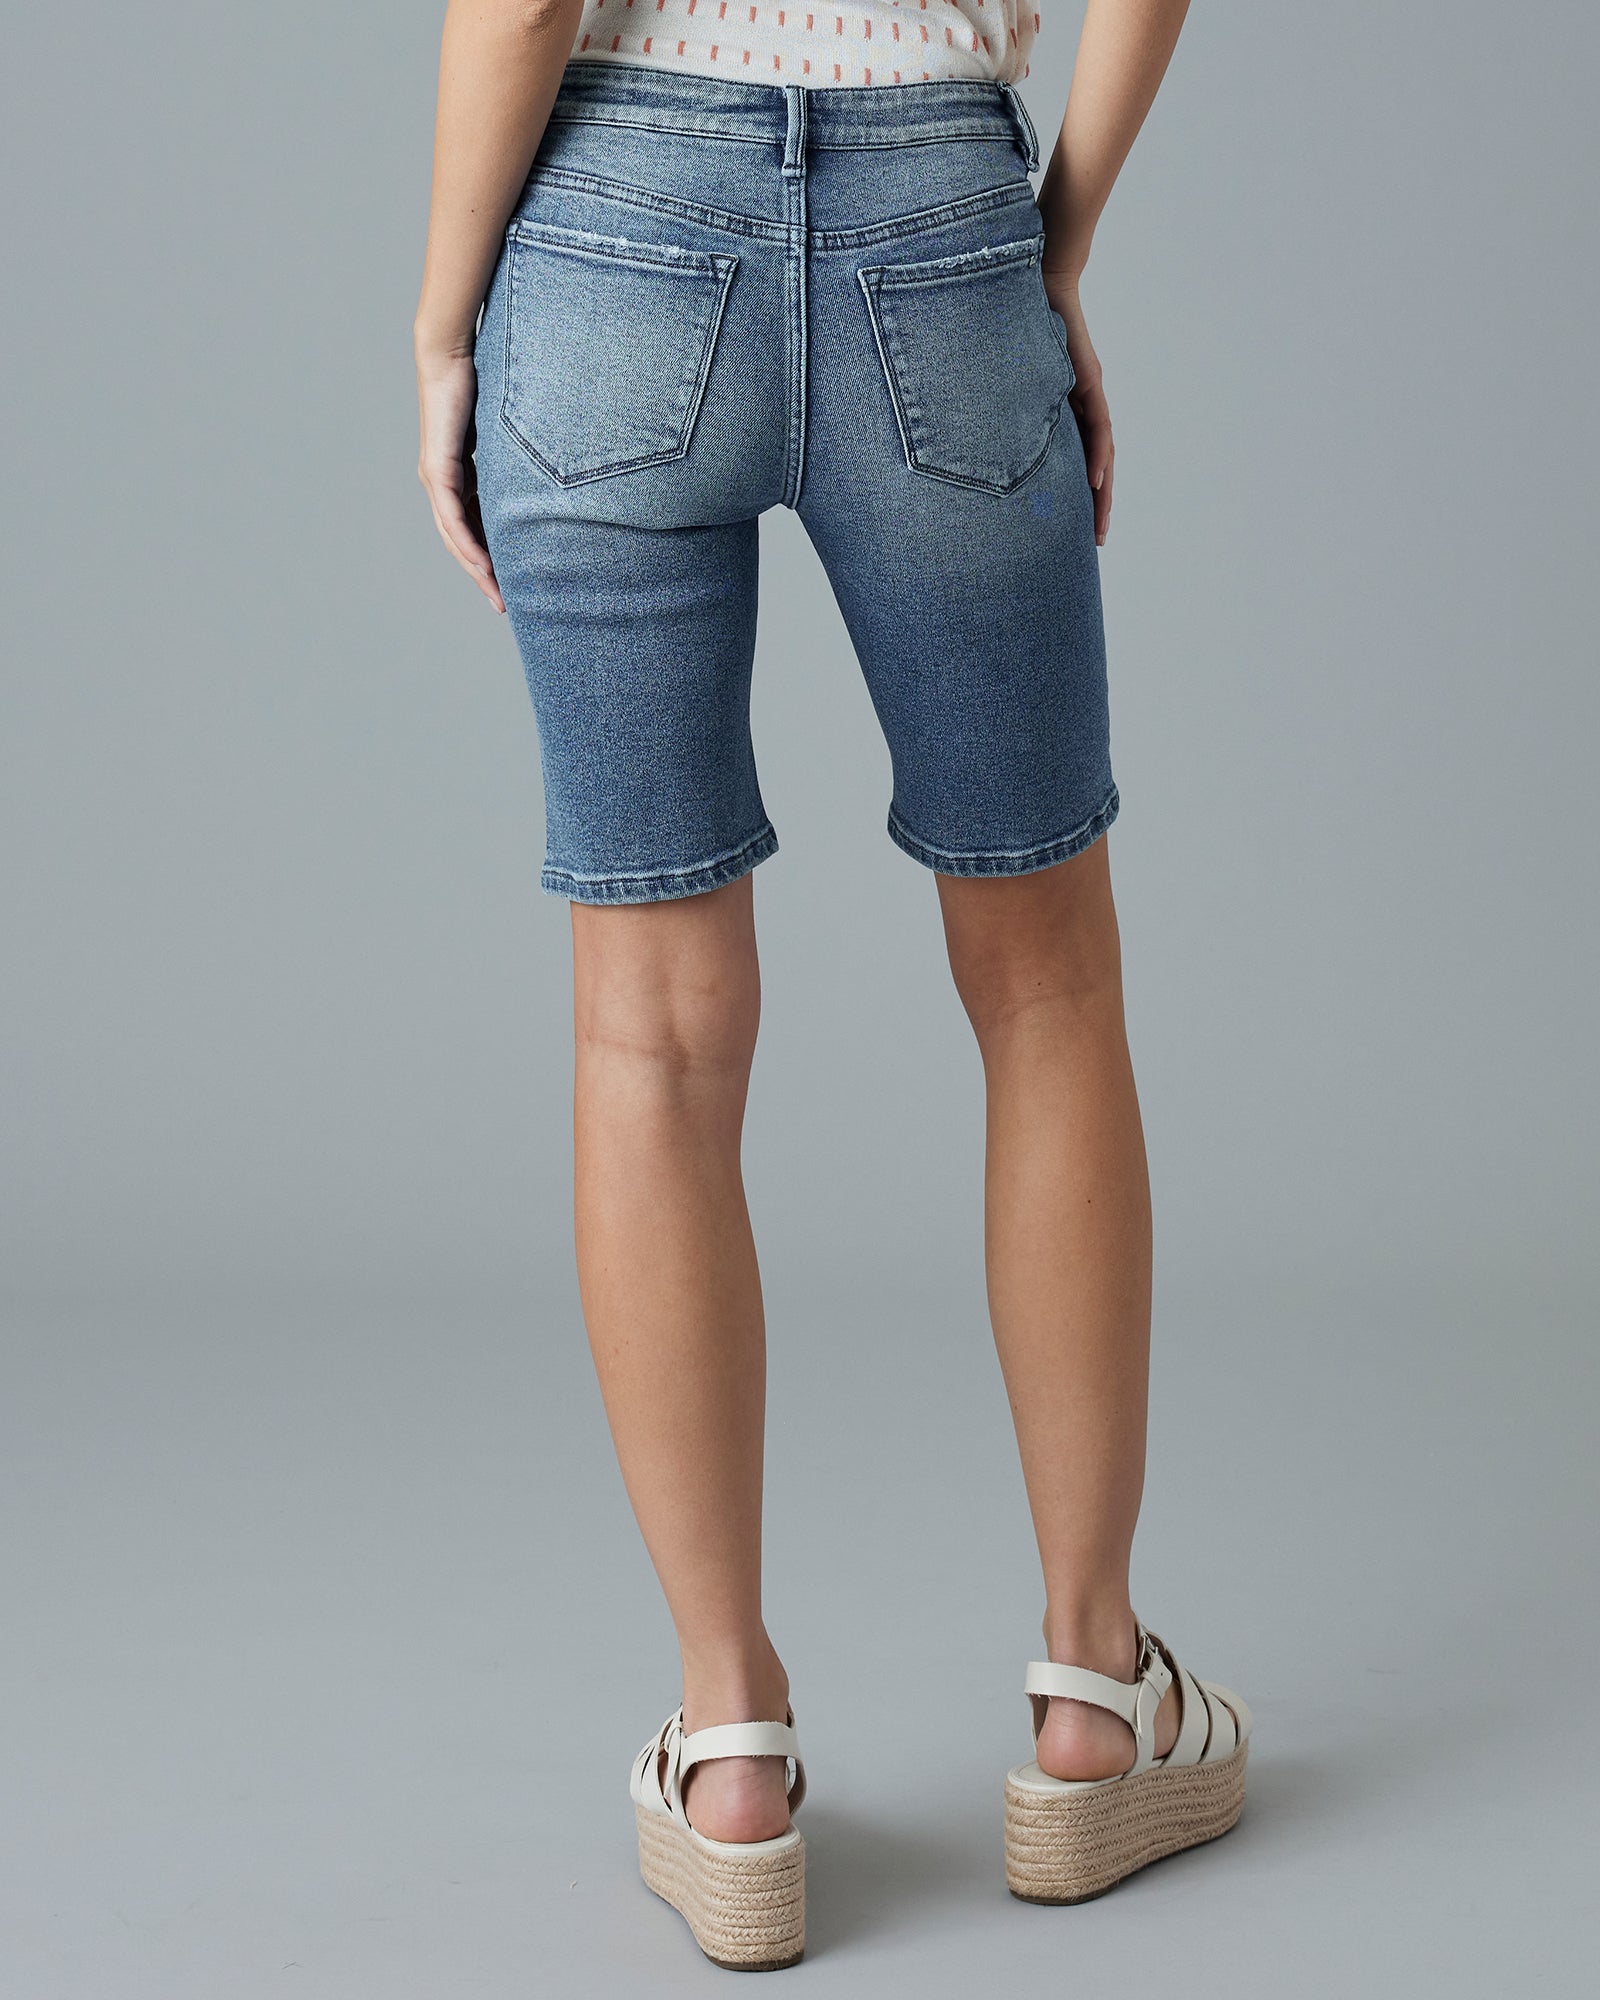 Woman in blue jean, button-fly shorts